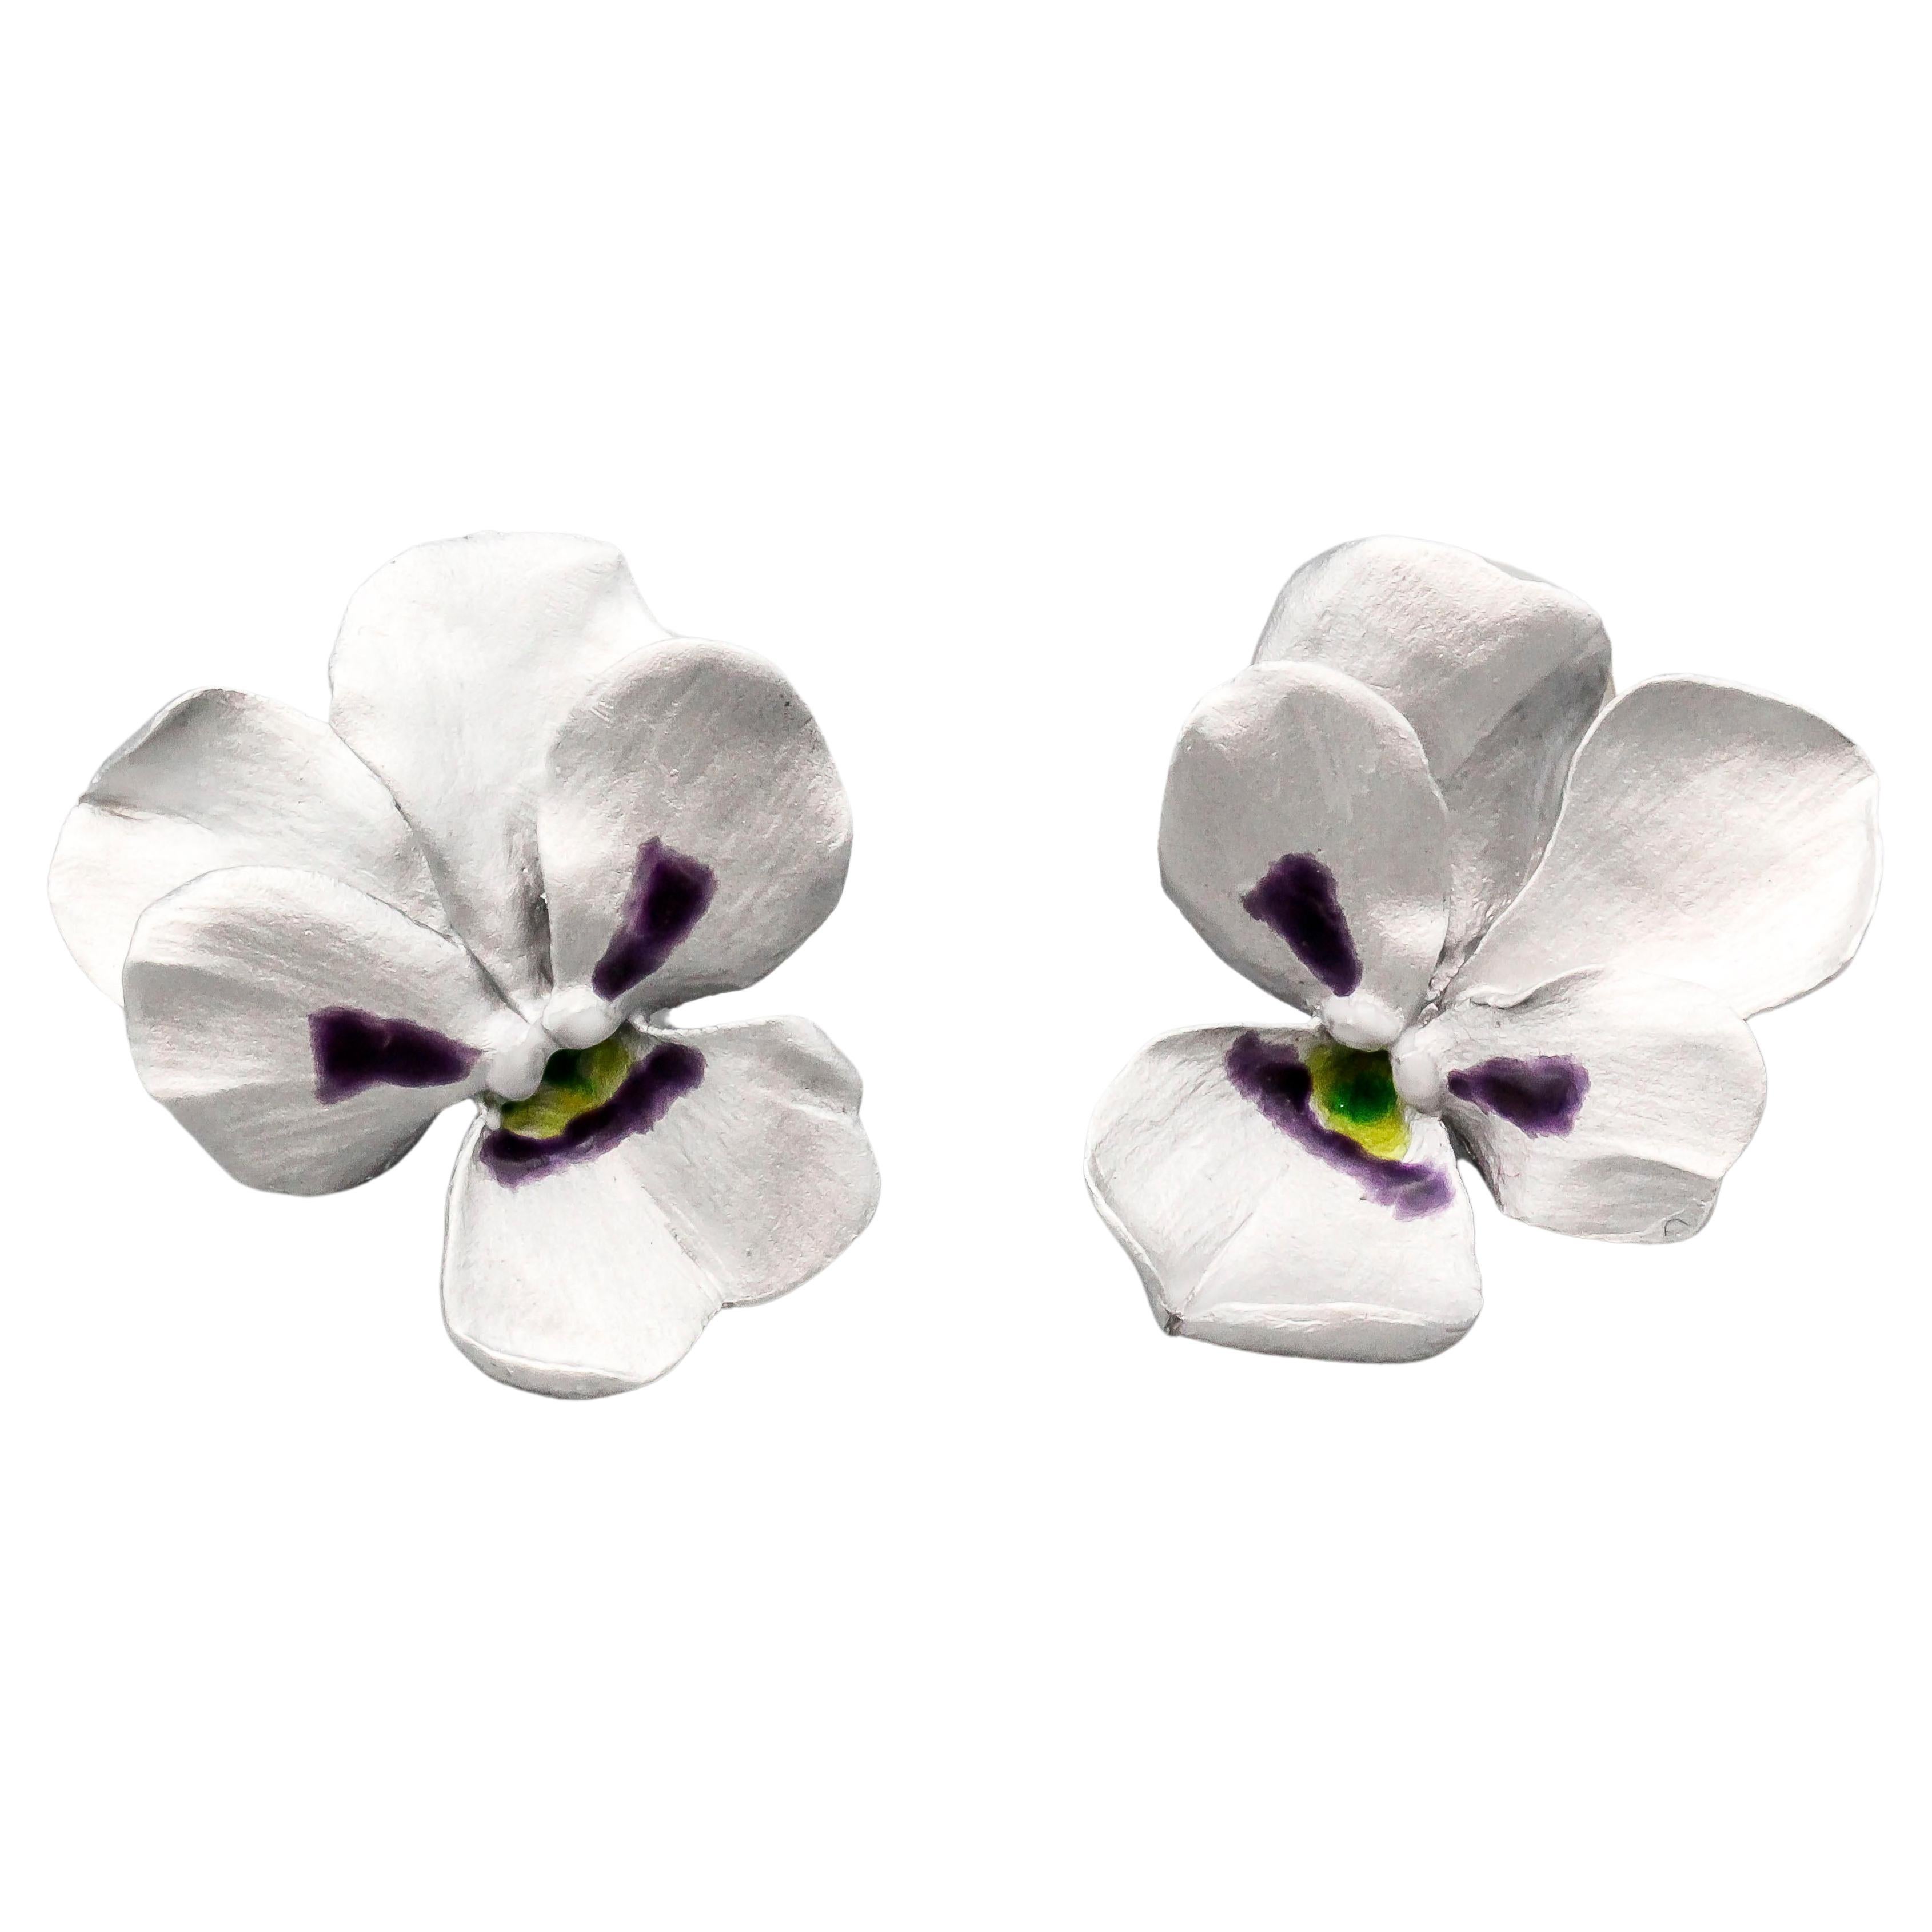 JAR Aluminum and Gold Pansy Earrings